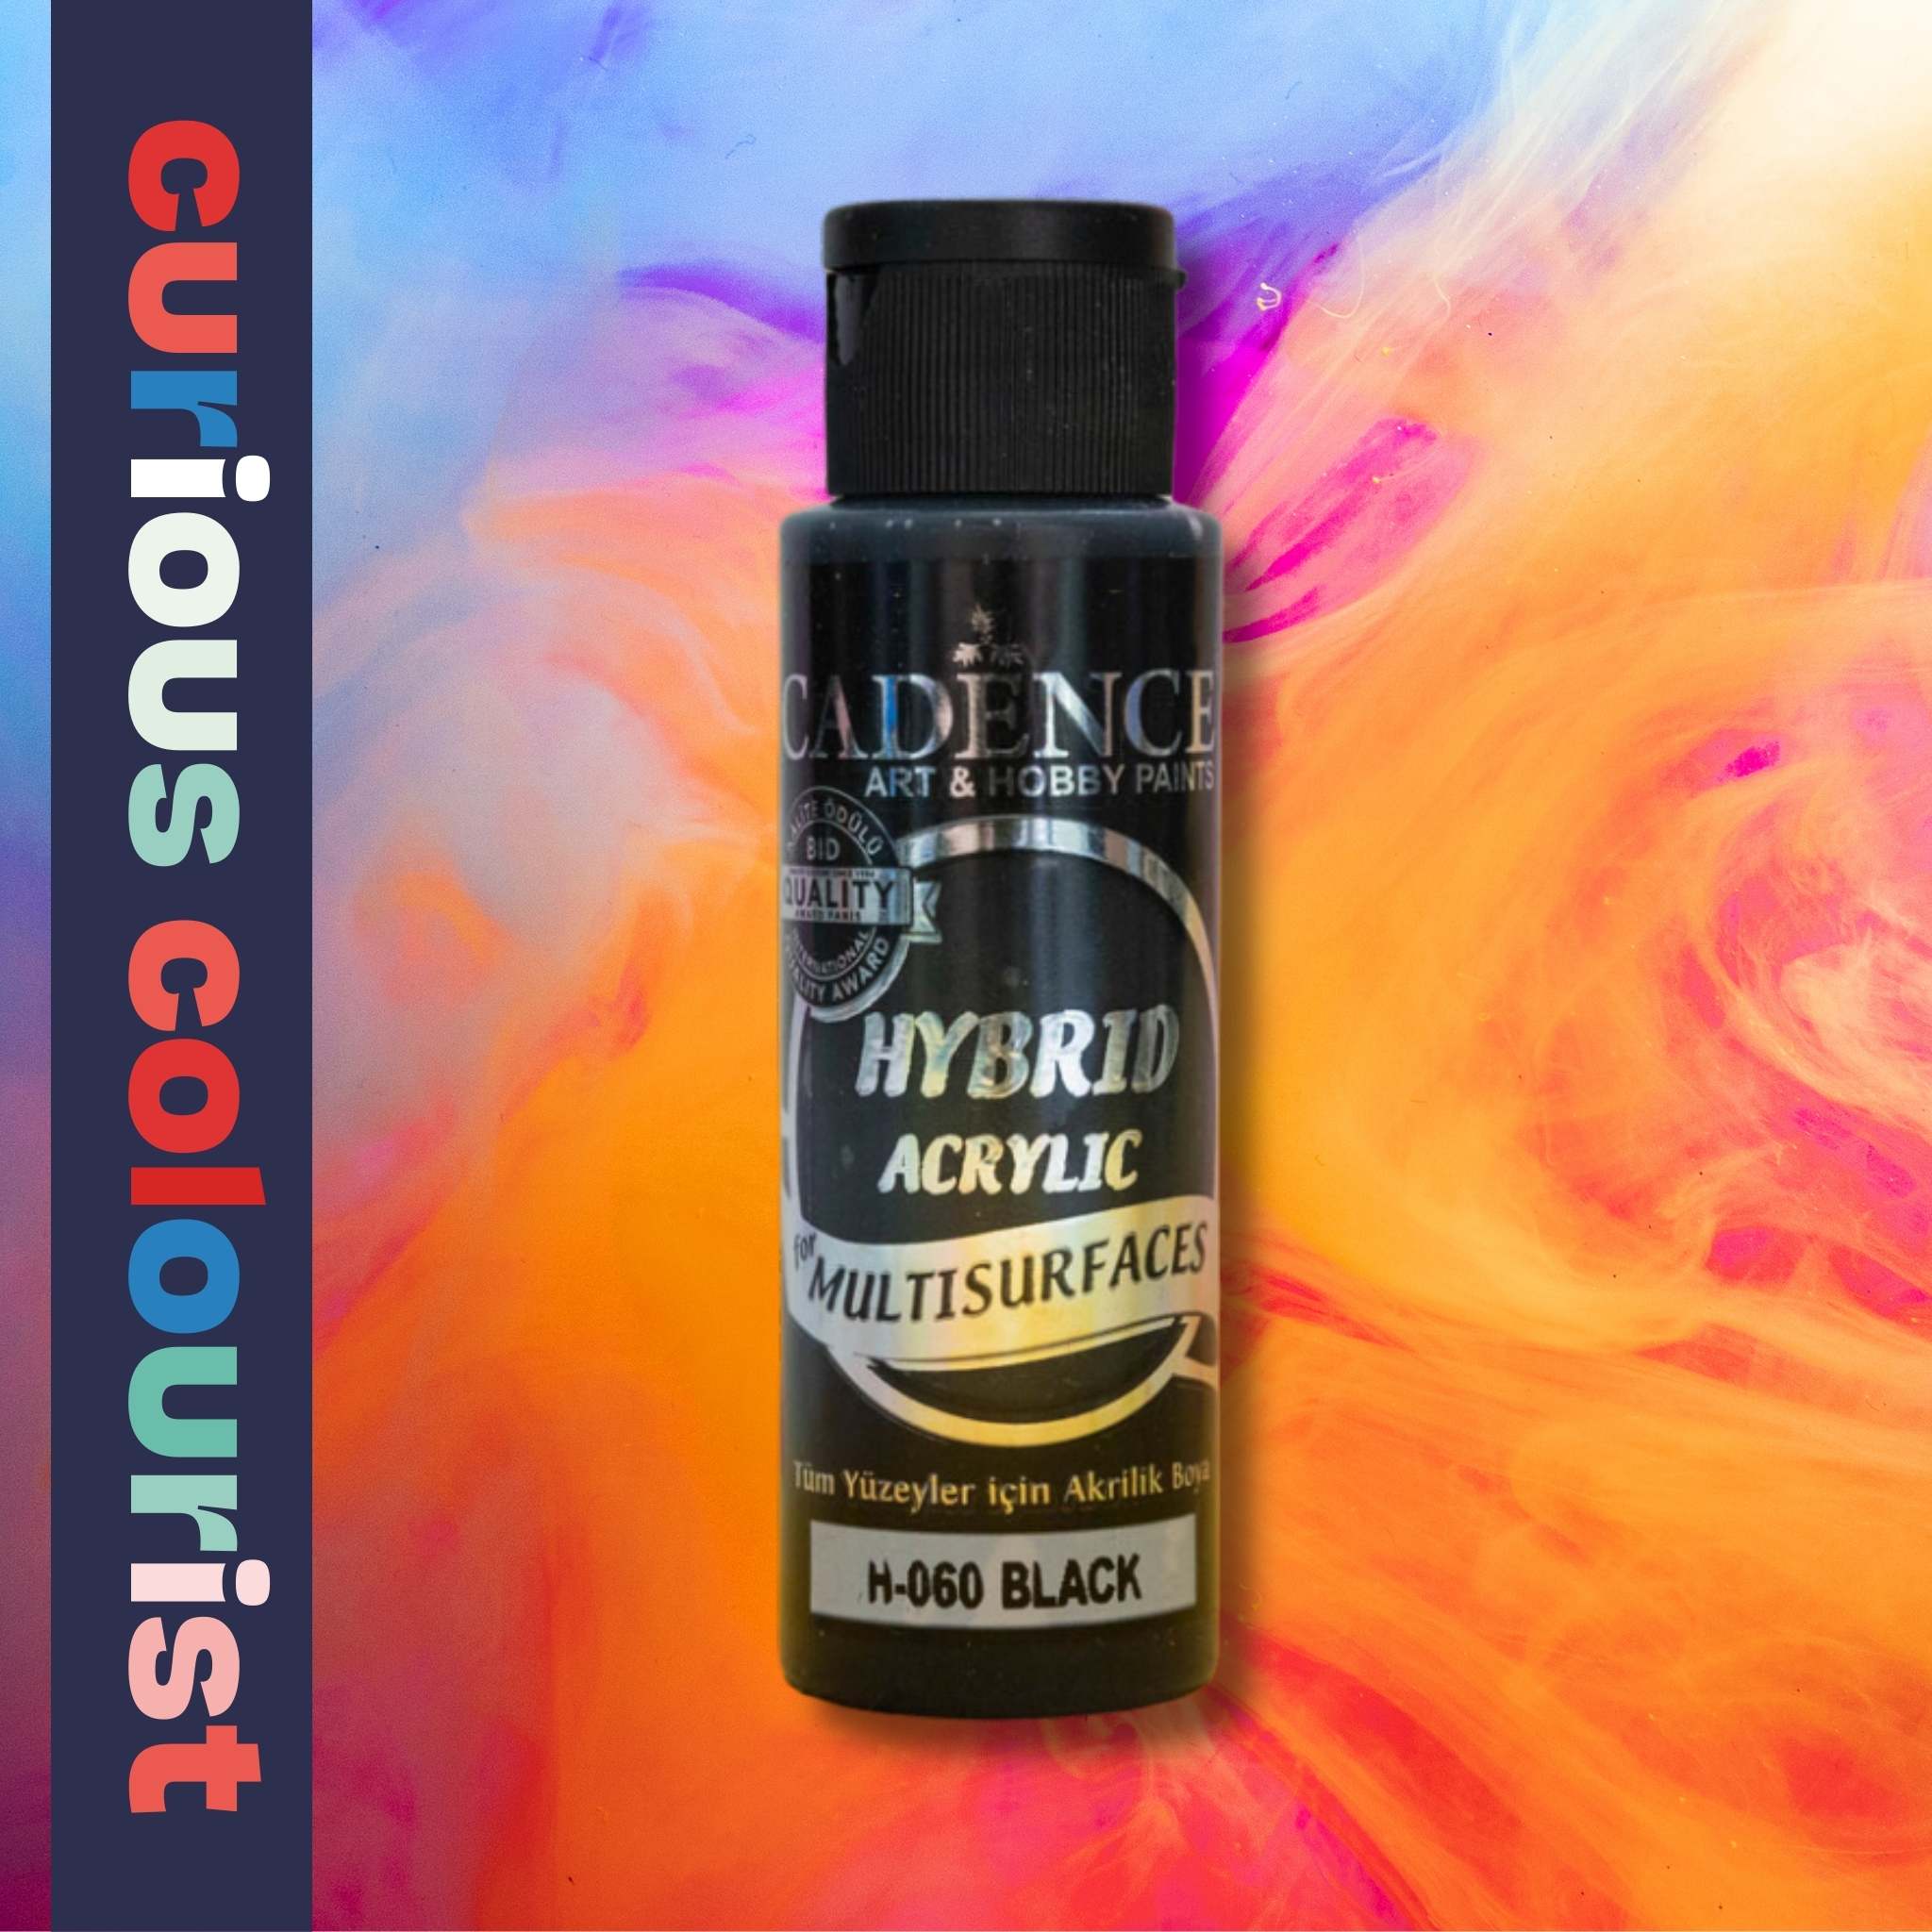 Make your leather craft a work of art with Hybrid Paint White! This leathercraft paint is perfect for adding custom colour and decorating your leather creations. Get creative and get crafty - your leather masterpieces await!